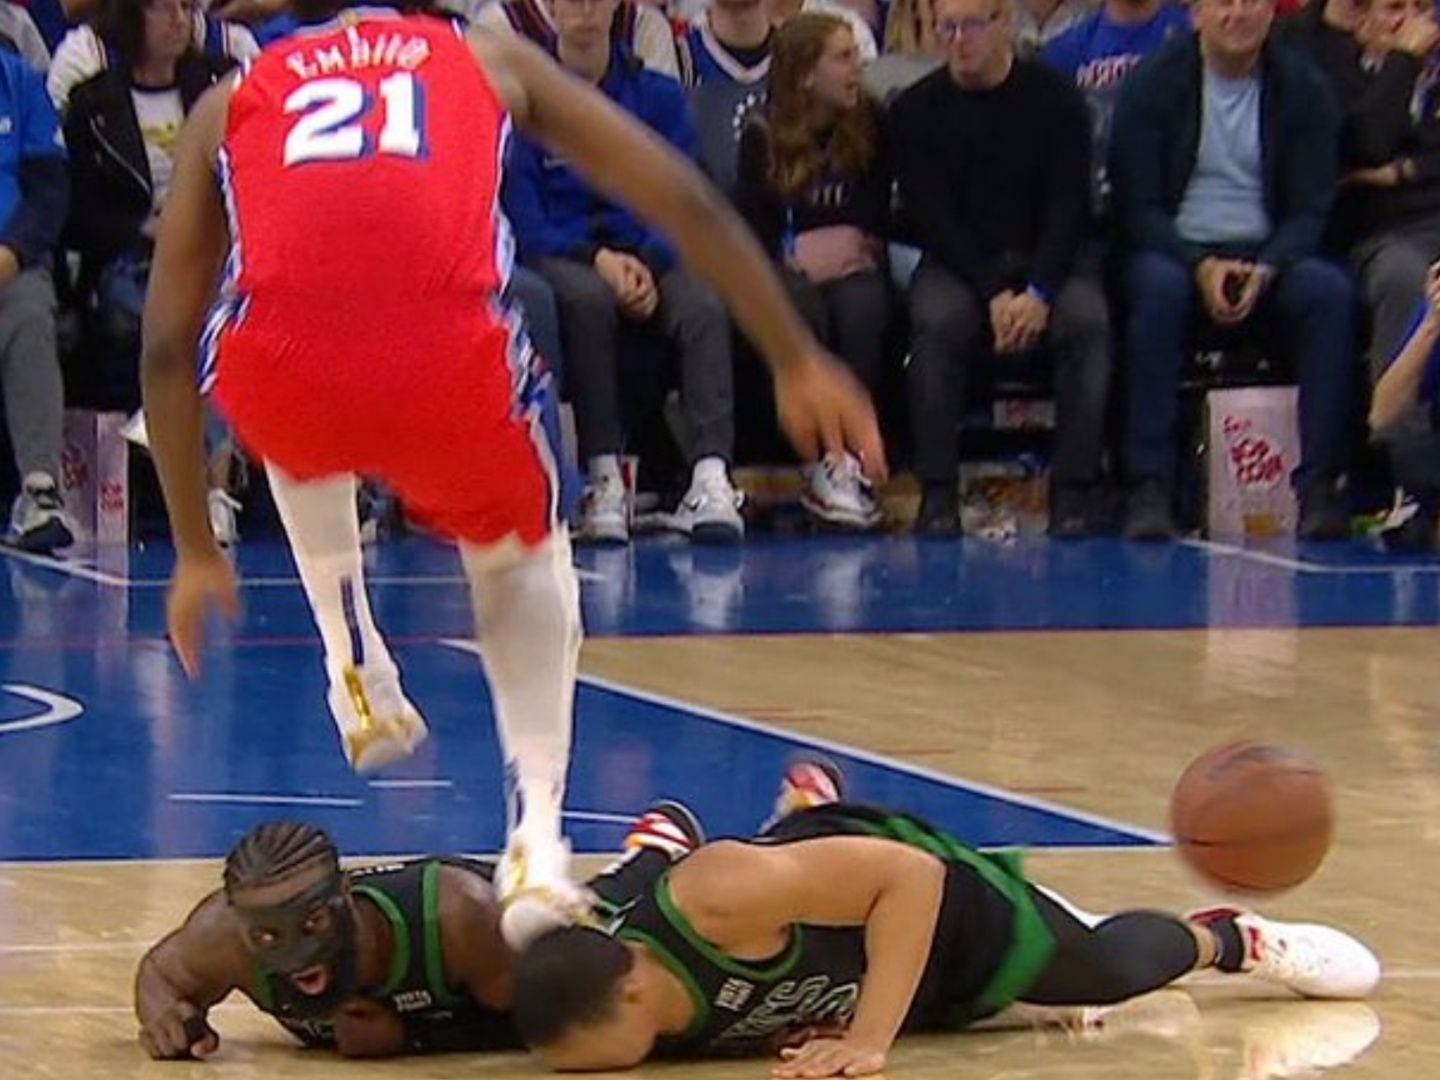 Joel Embiid accidentally stomped on Grant Williams